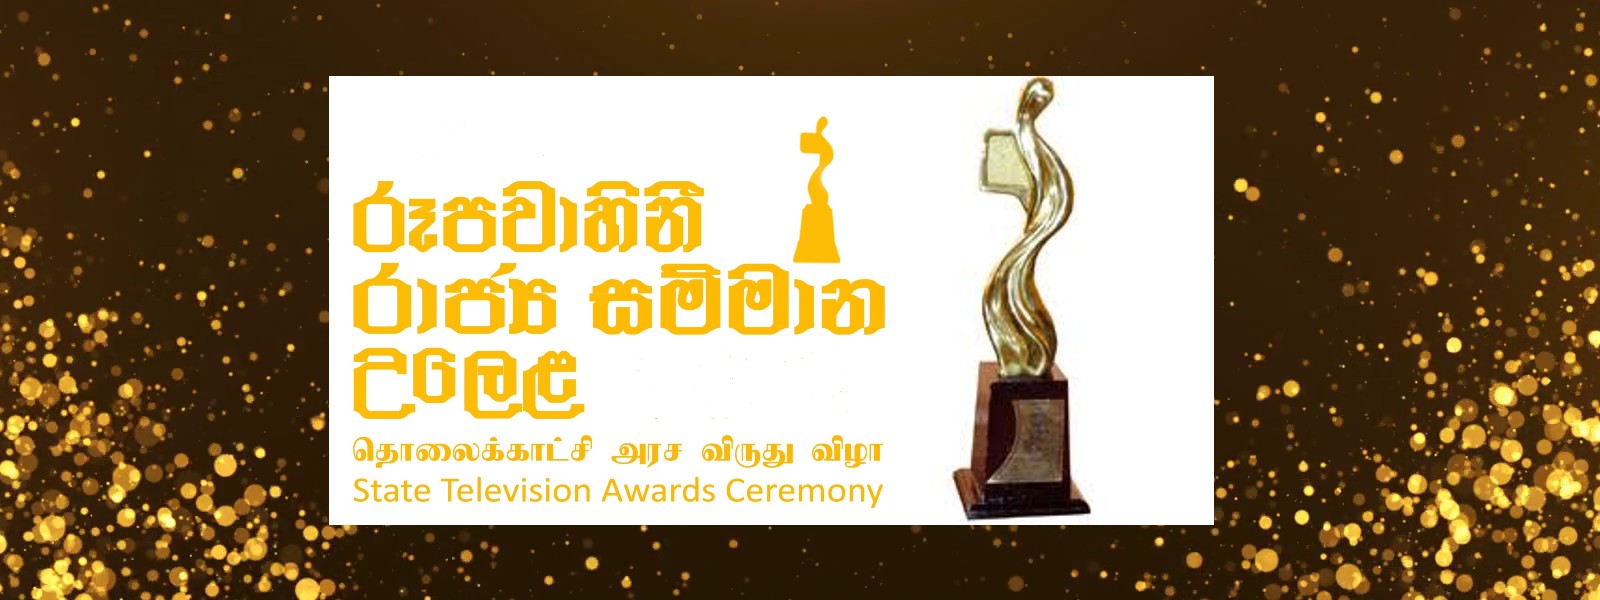 News 1st wins multiple awards at 2020 State Television Awards at BMICH